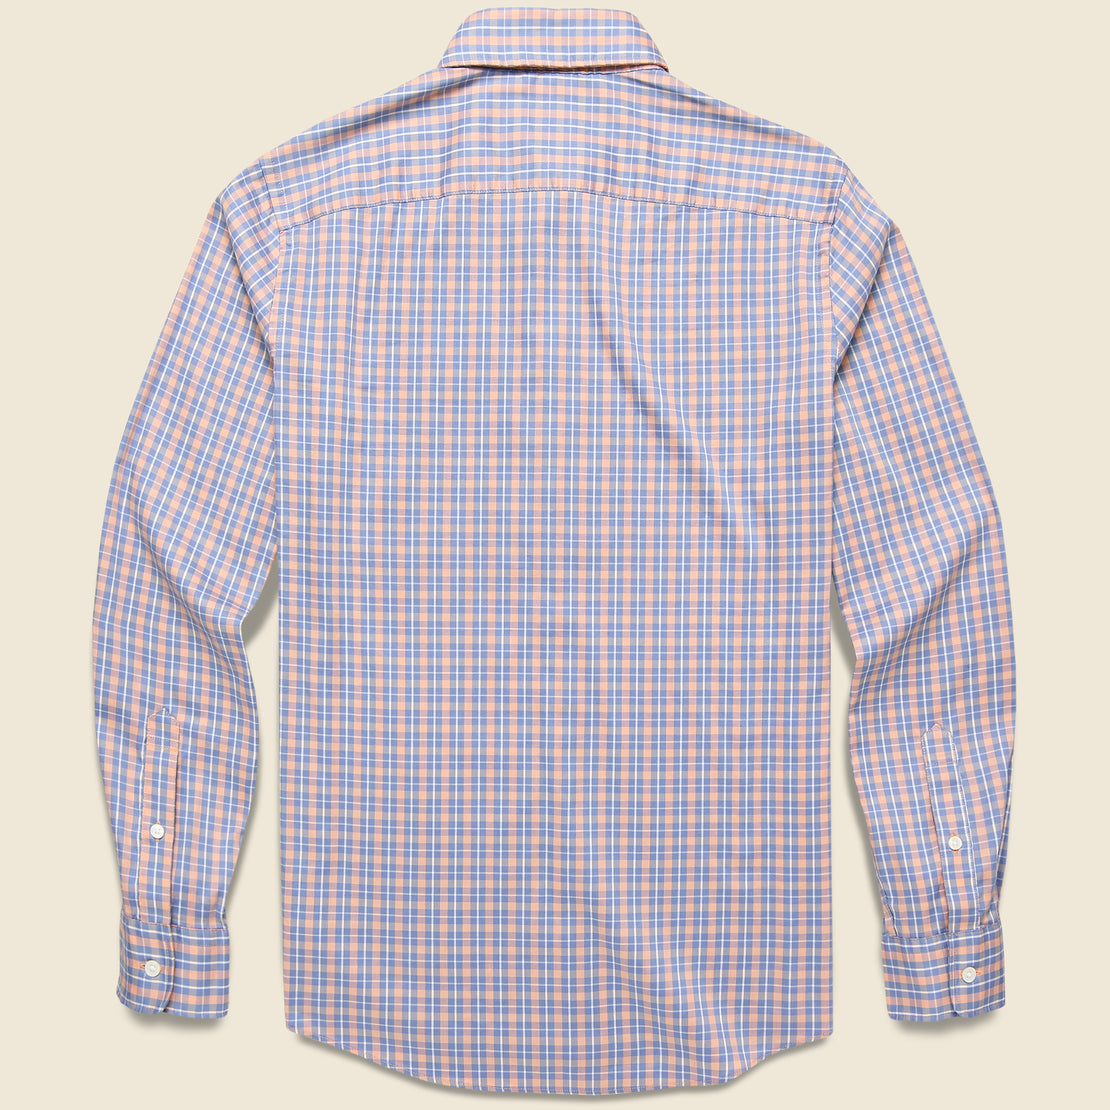 Movement Shirt - Morning Cove Plaid - Faherty - STAG Provisions - Tops - L/S Woven - Plaid